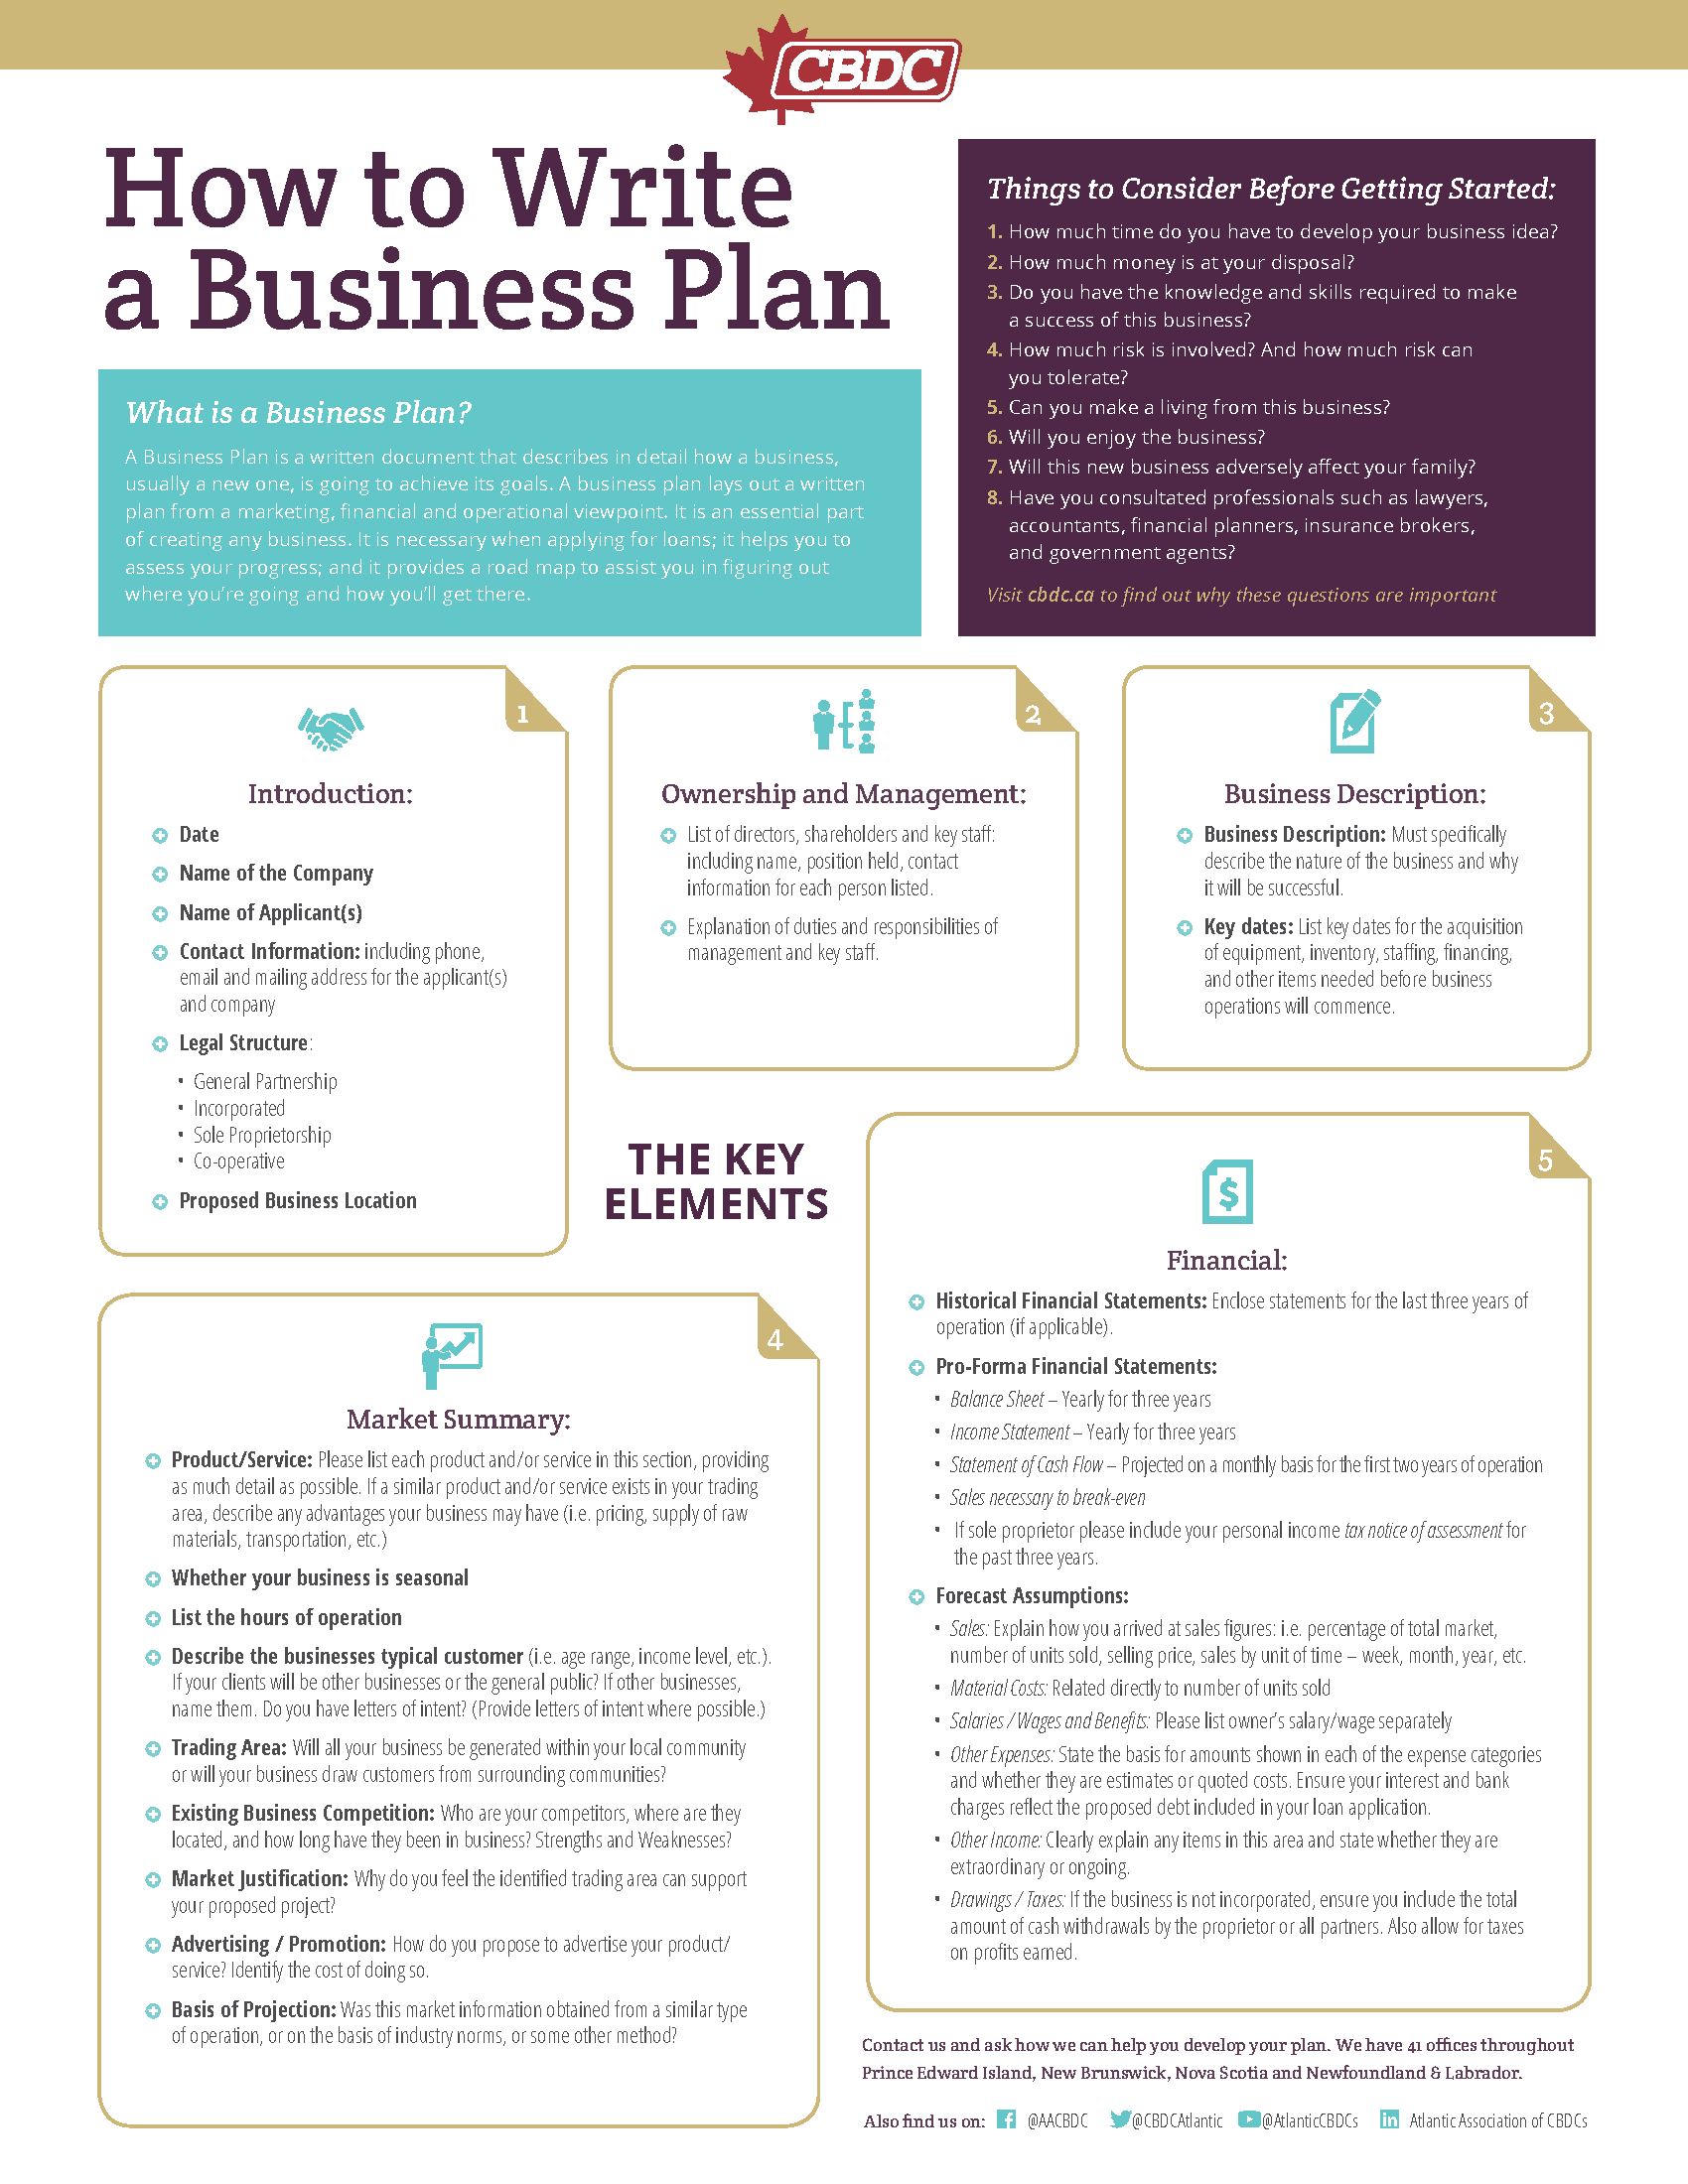 Writing a business plan | Business plan guide | Barclays